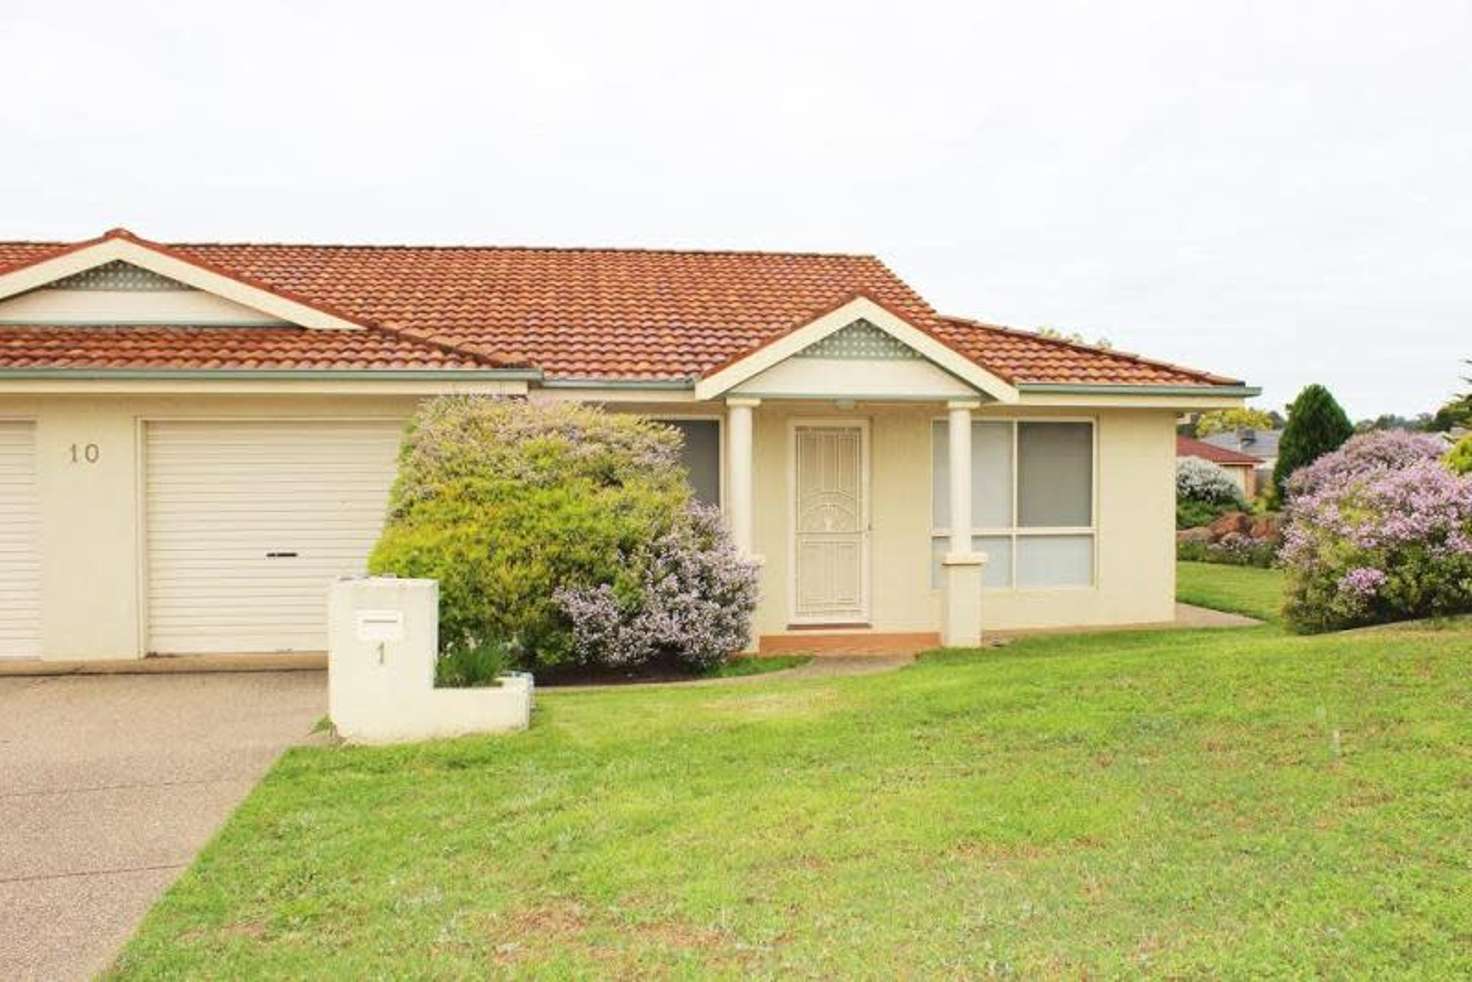 Main view of Homely villa listing, 1/10 Kaloona Drive, Bourkelands NSW 2650